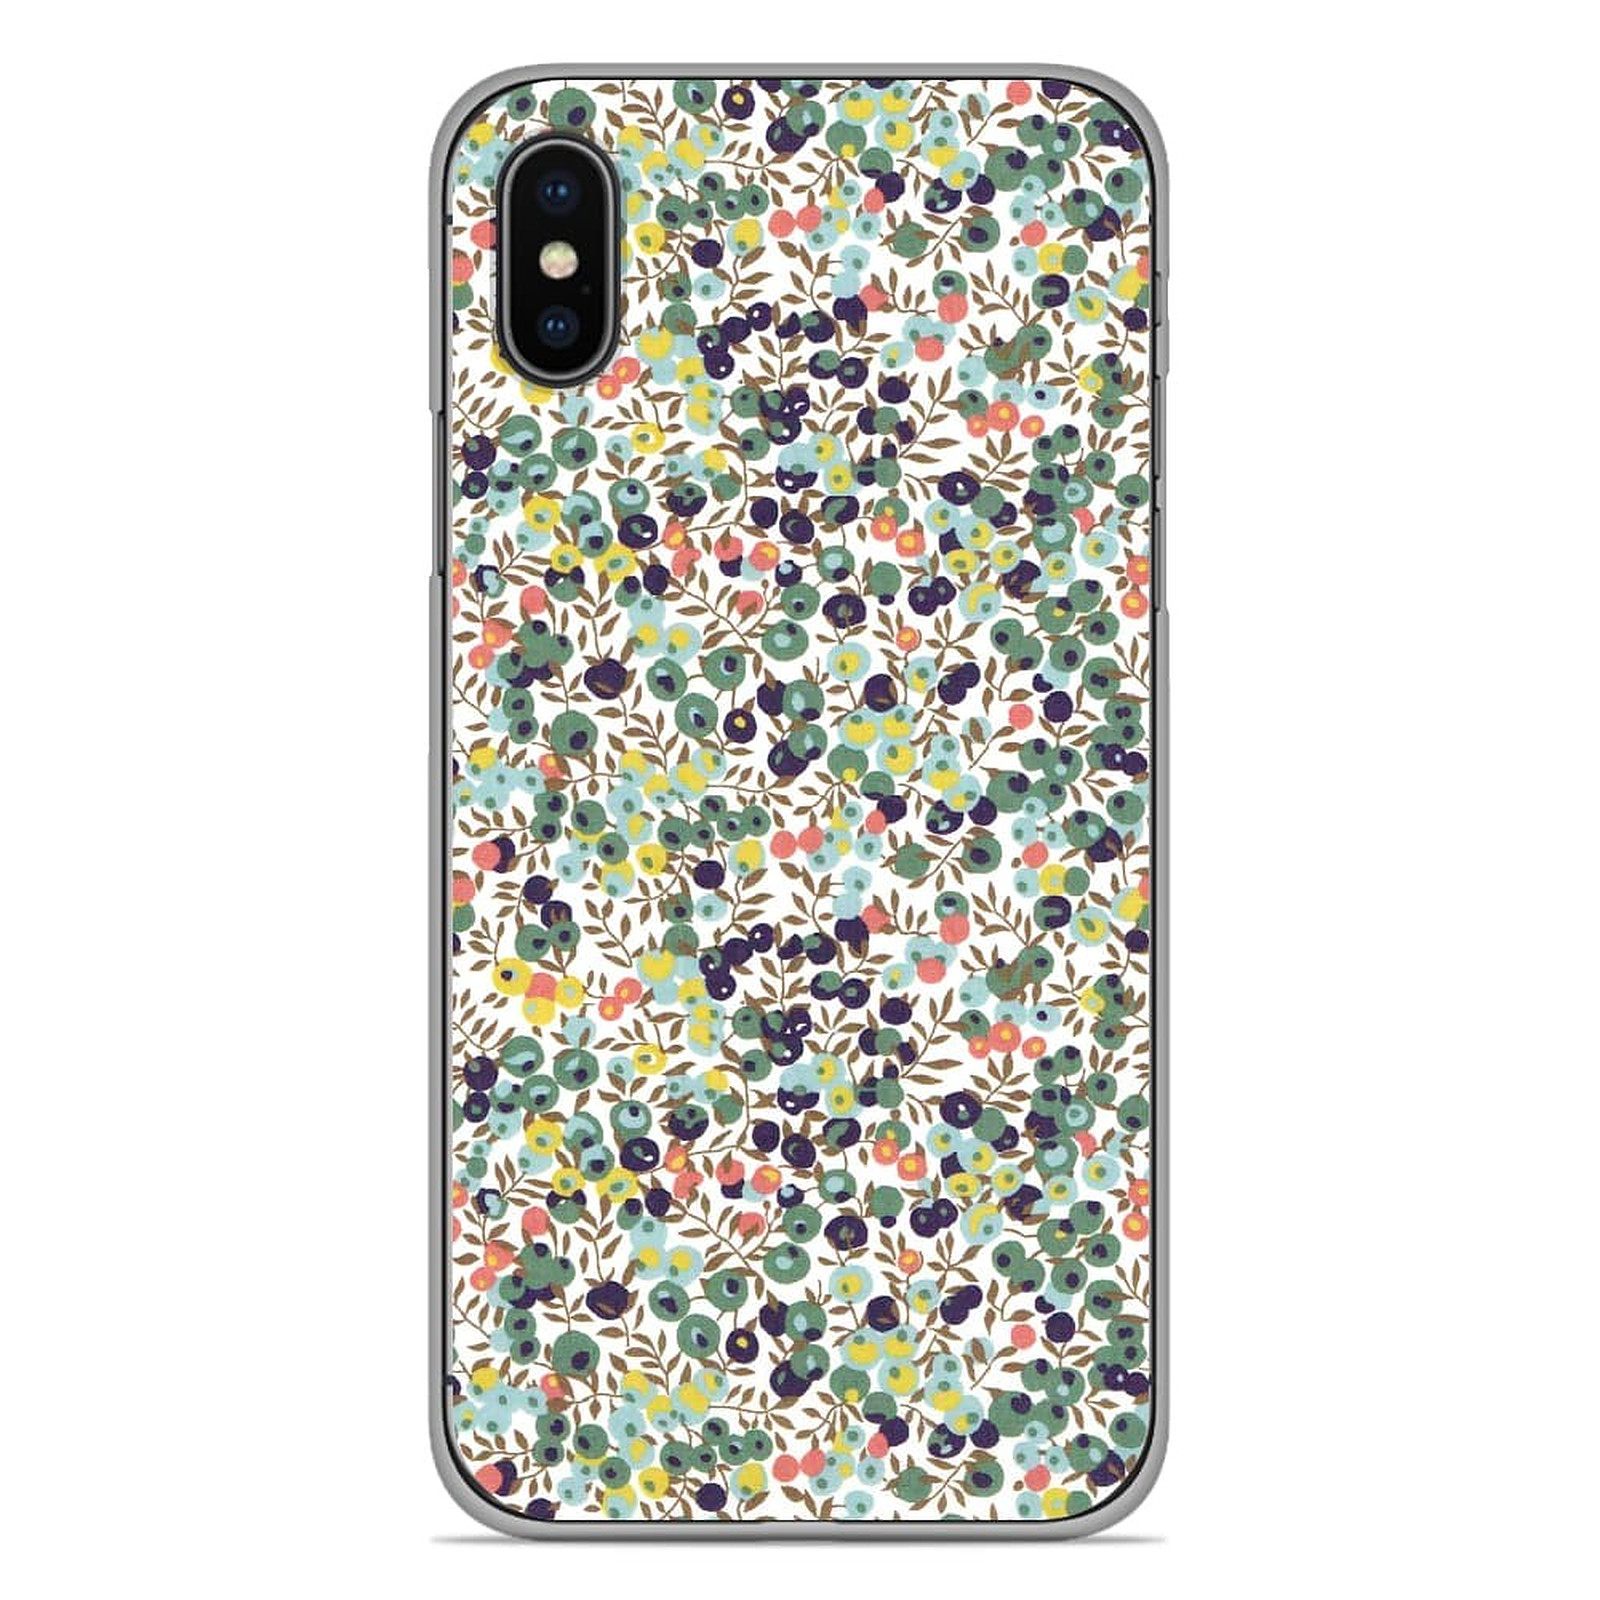 1001 Coques Coque silicone gel Apple iPhone X / XS motif Liberty Wiltshire Vert - Coque telephone 1001Coques